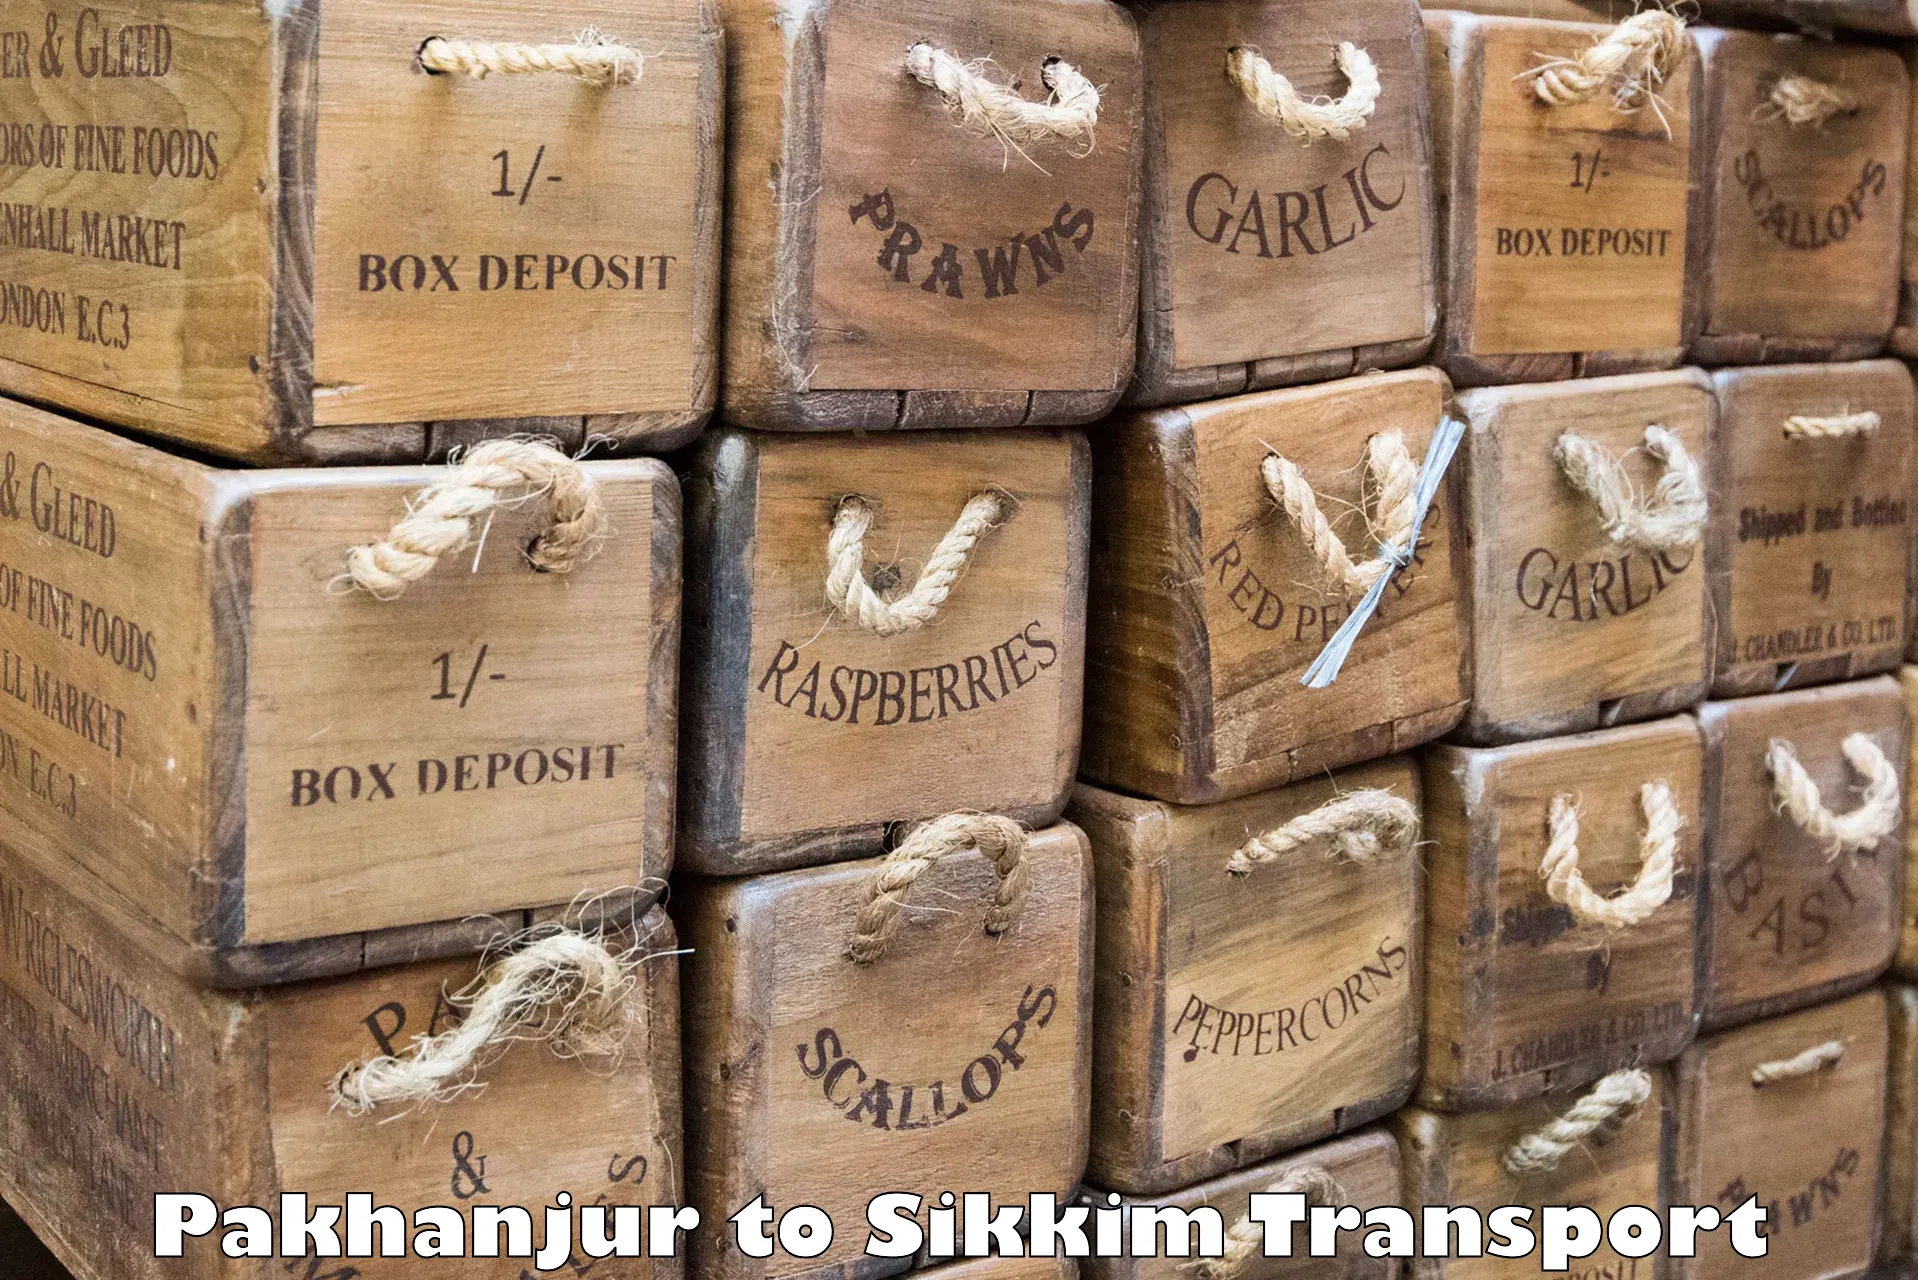 Daily transport service Pakhanjur to East Sikkim